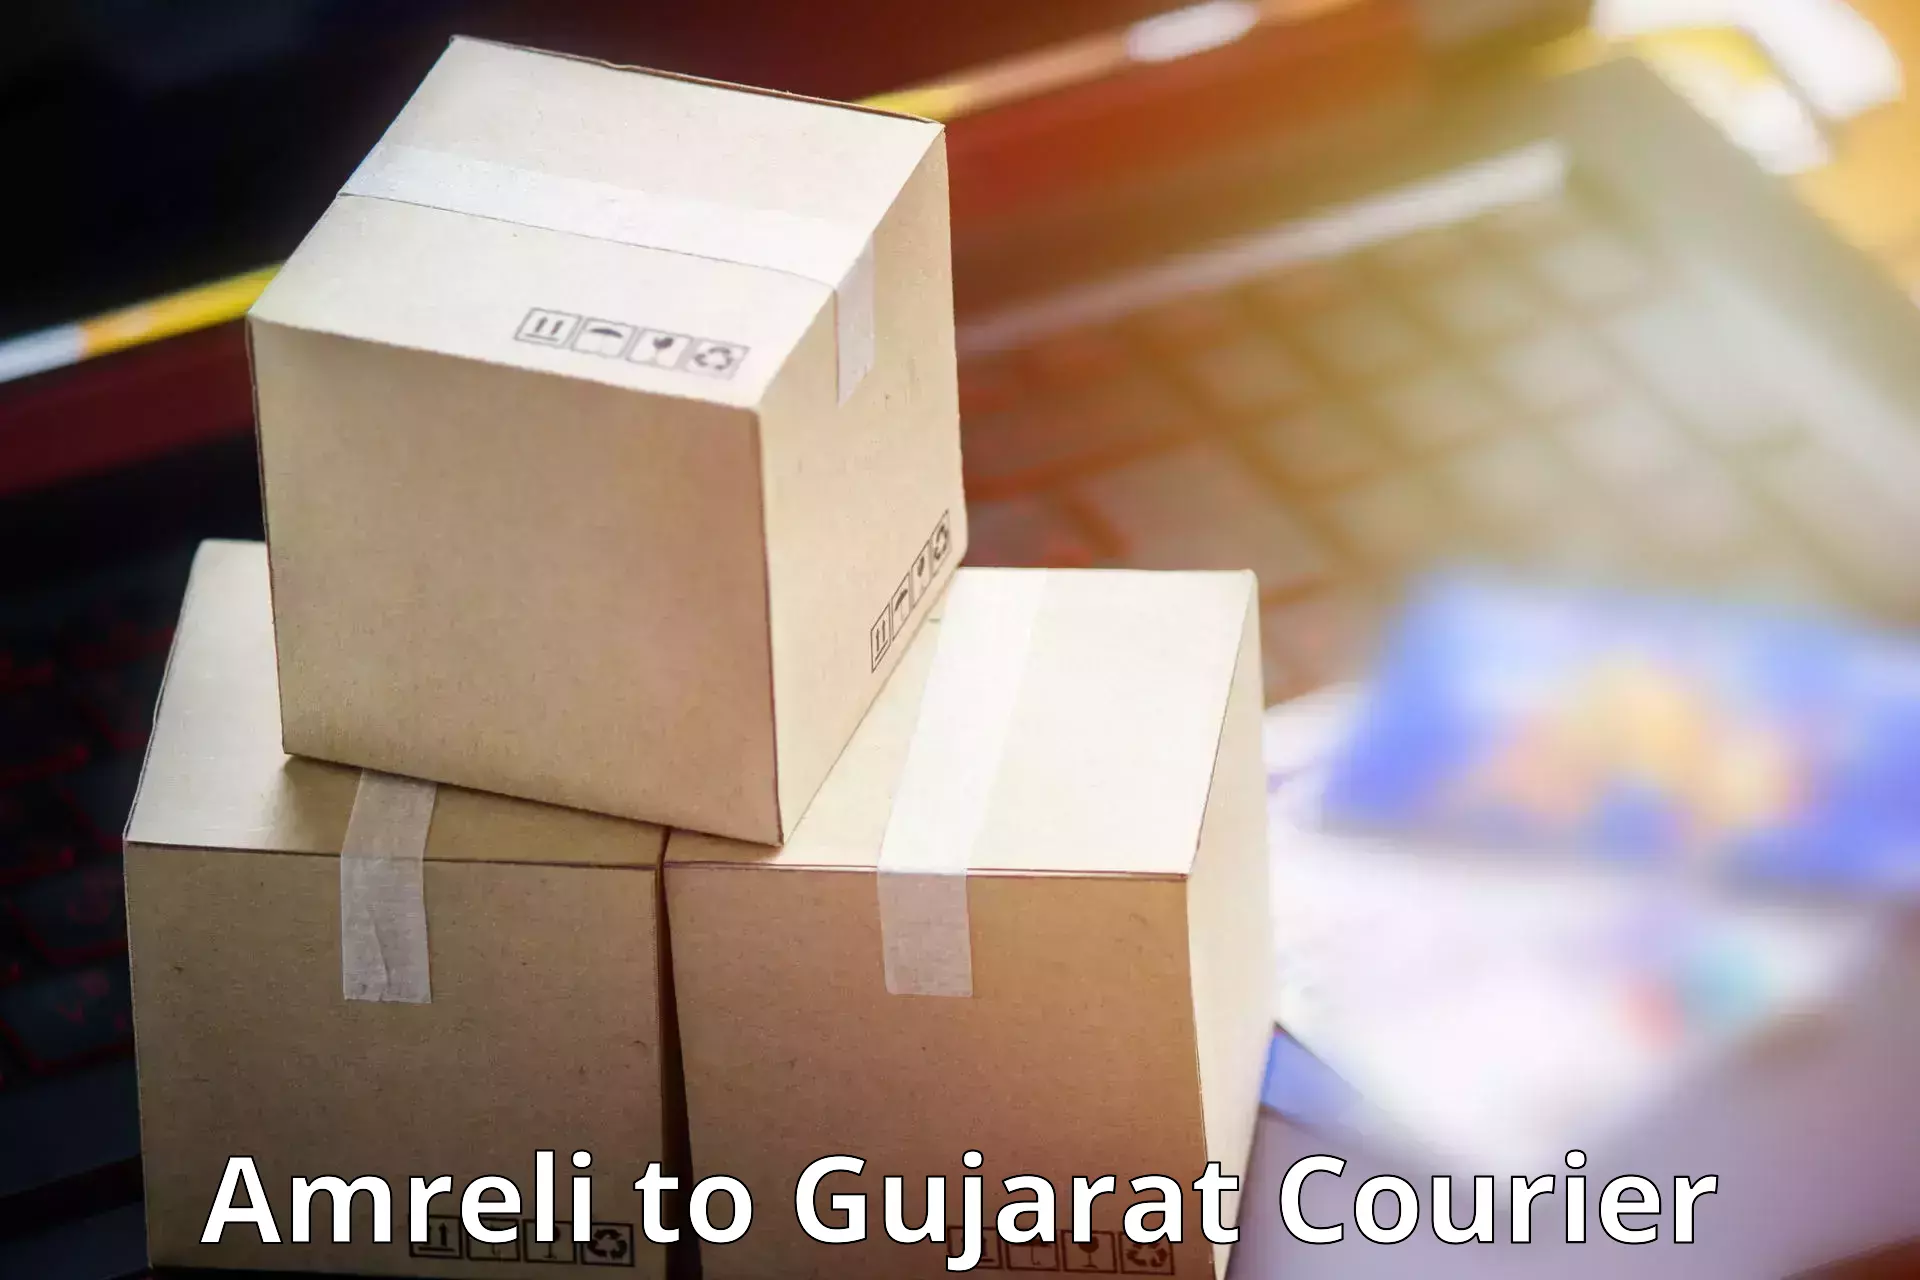 Courier service partnerships in Amreli to Bhuj